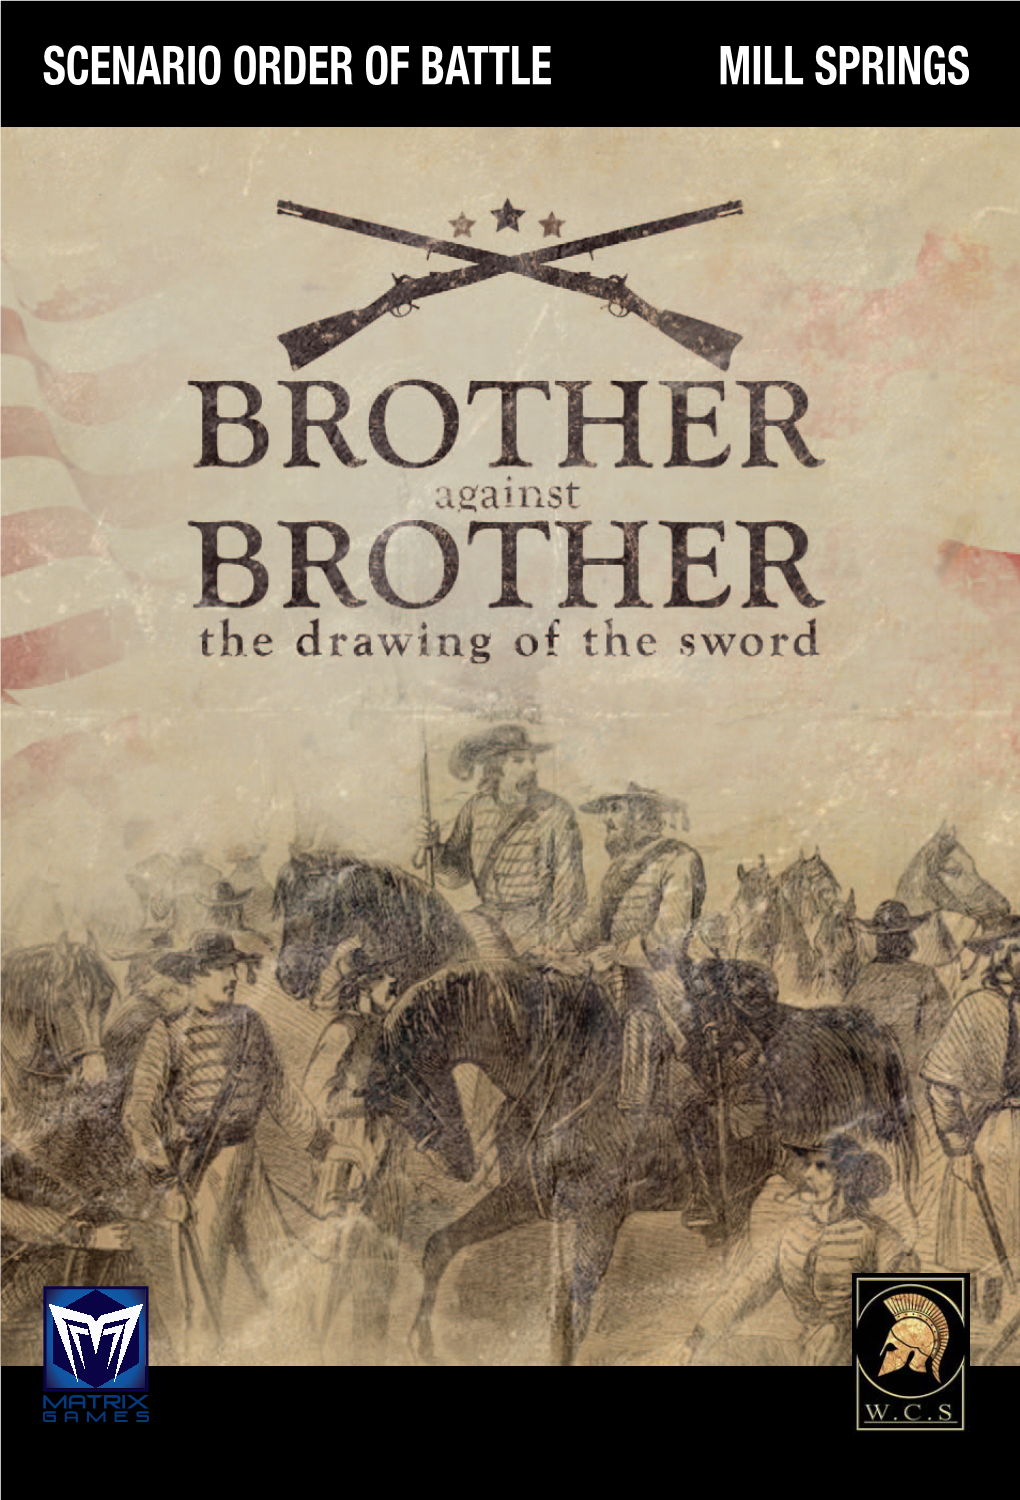 SCENARIO ORDER of BATTLE Mill Springs Battle of Mill Springs: the Battle with Many Names (January 19, 1862) by Bill Battle